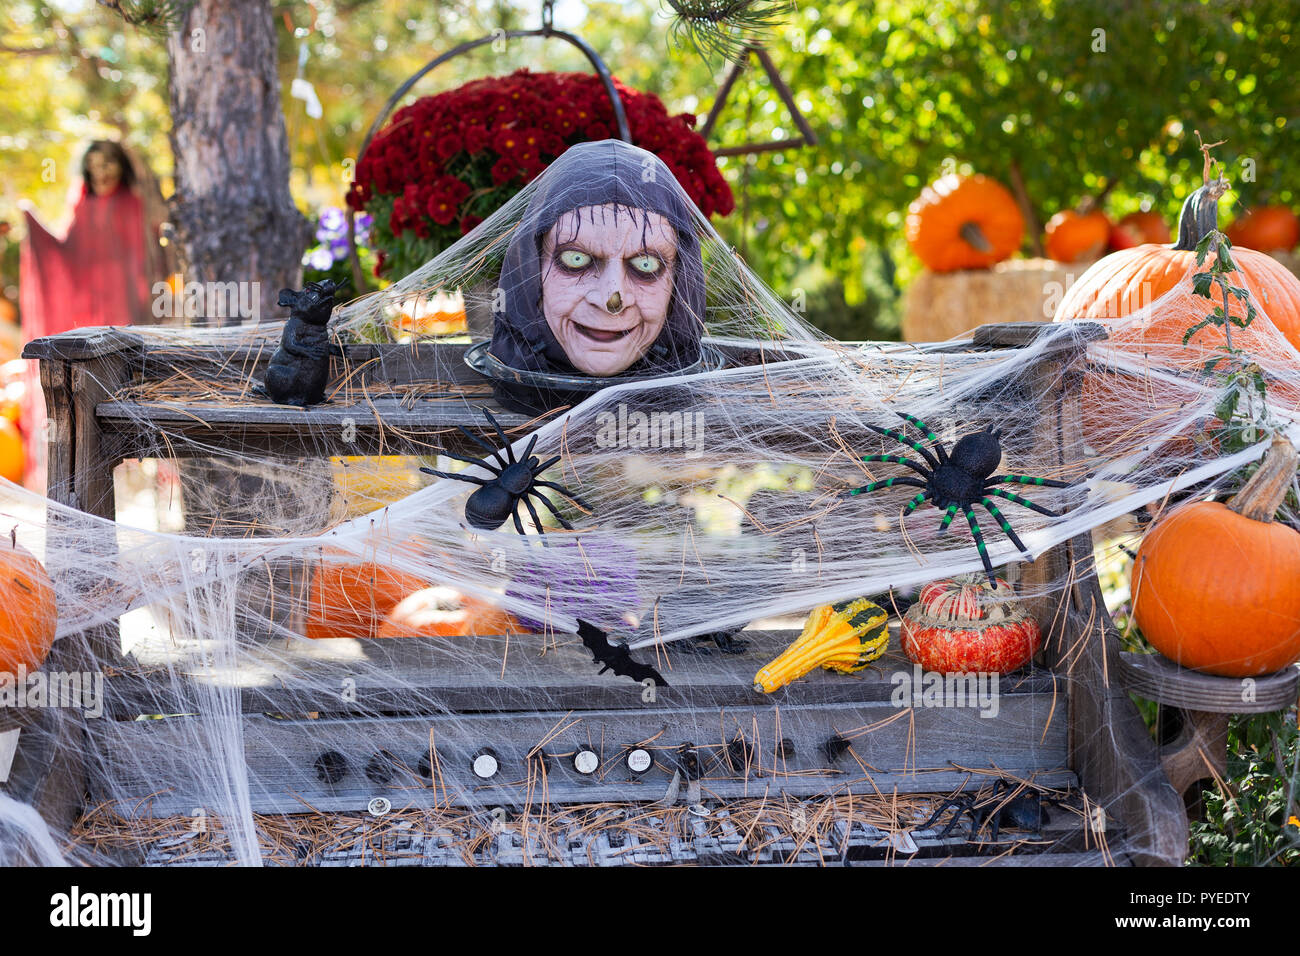 Halloween decorations at a pumpkin patch Stock Photo